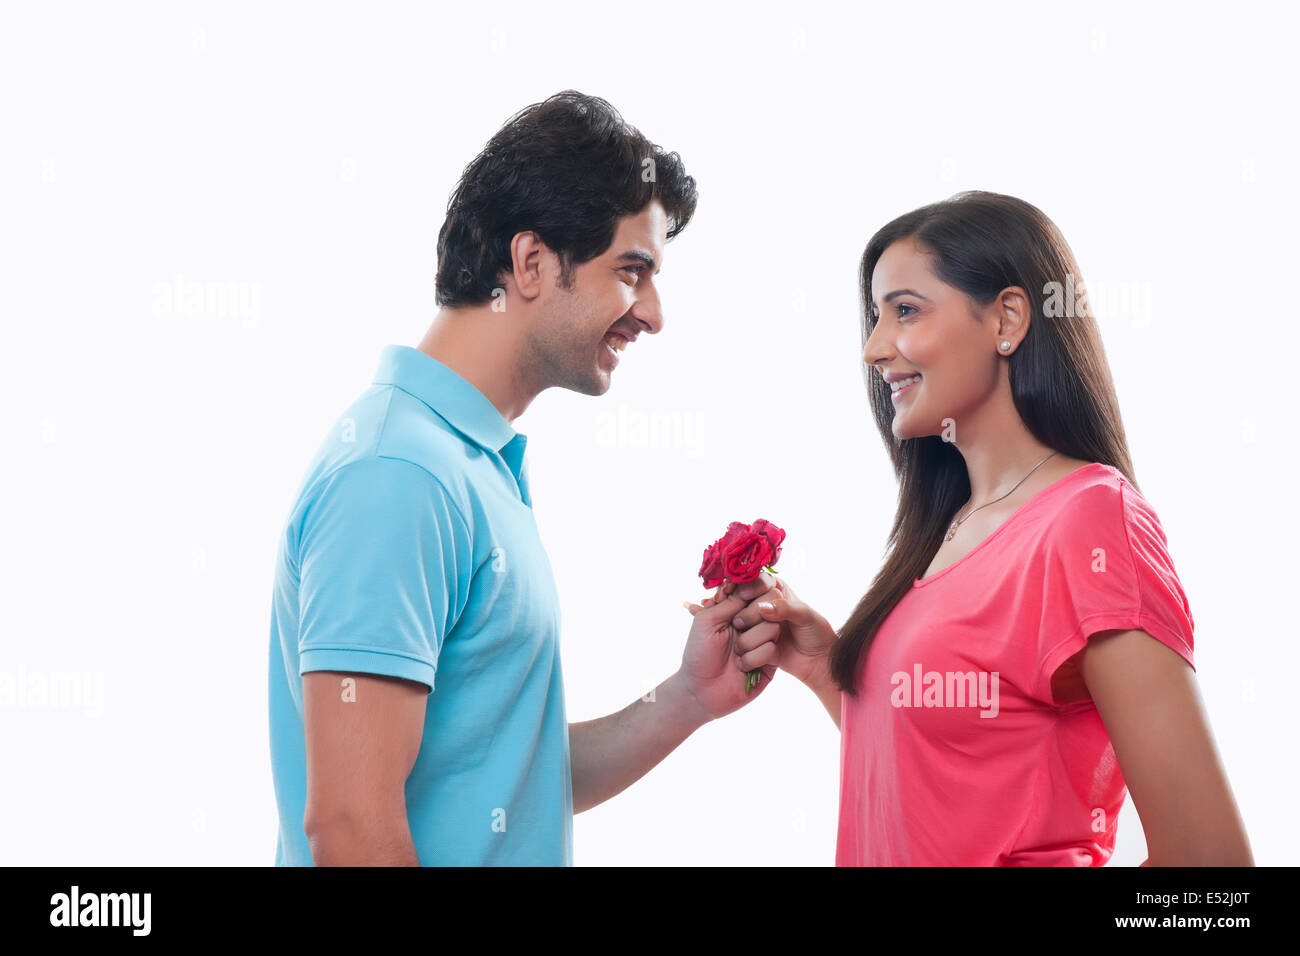 Side view of happy man giving rose to woman over white background Stock Photo